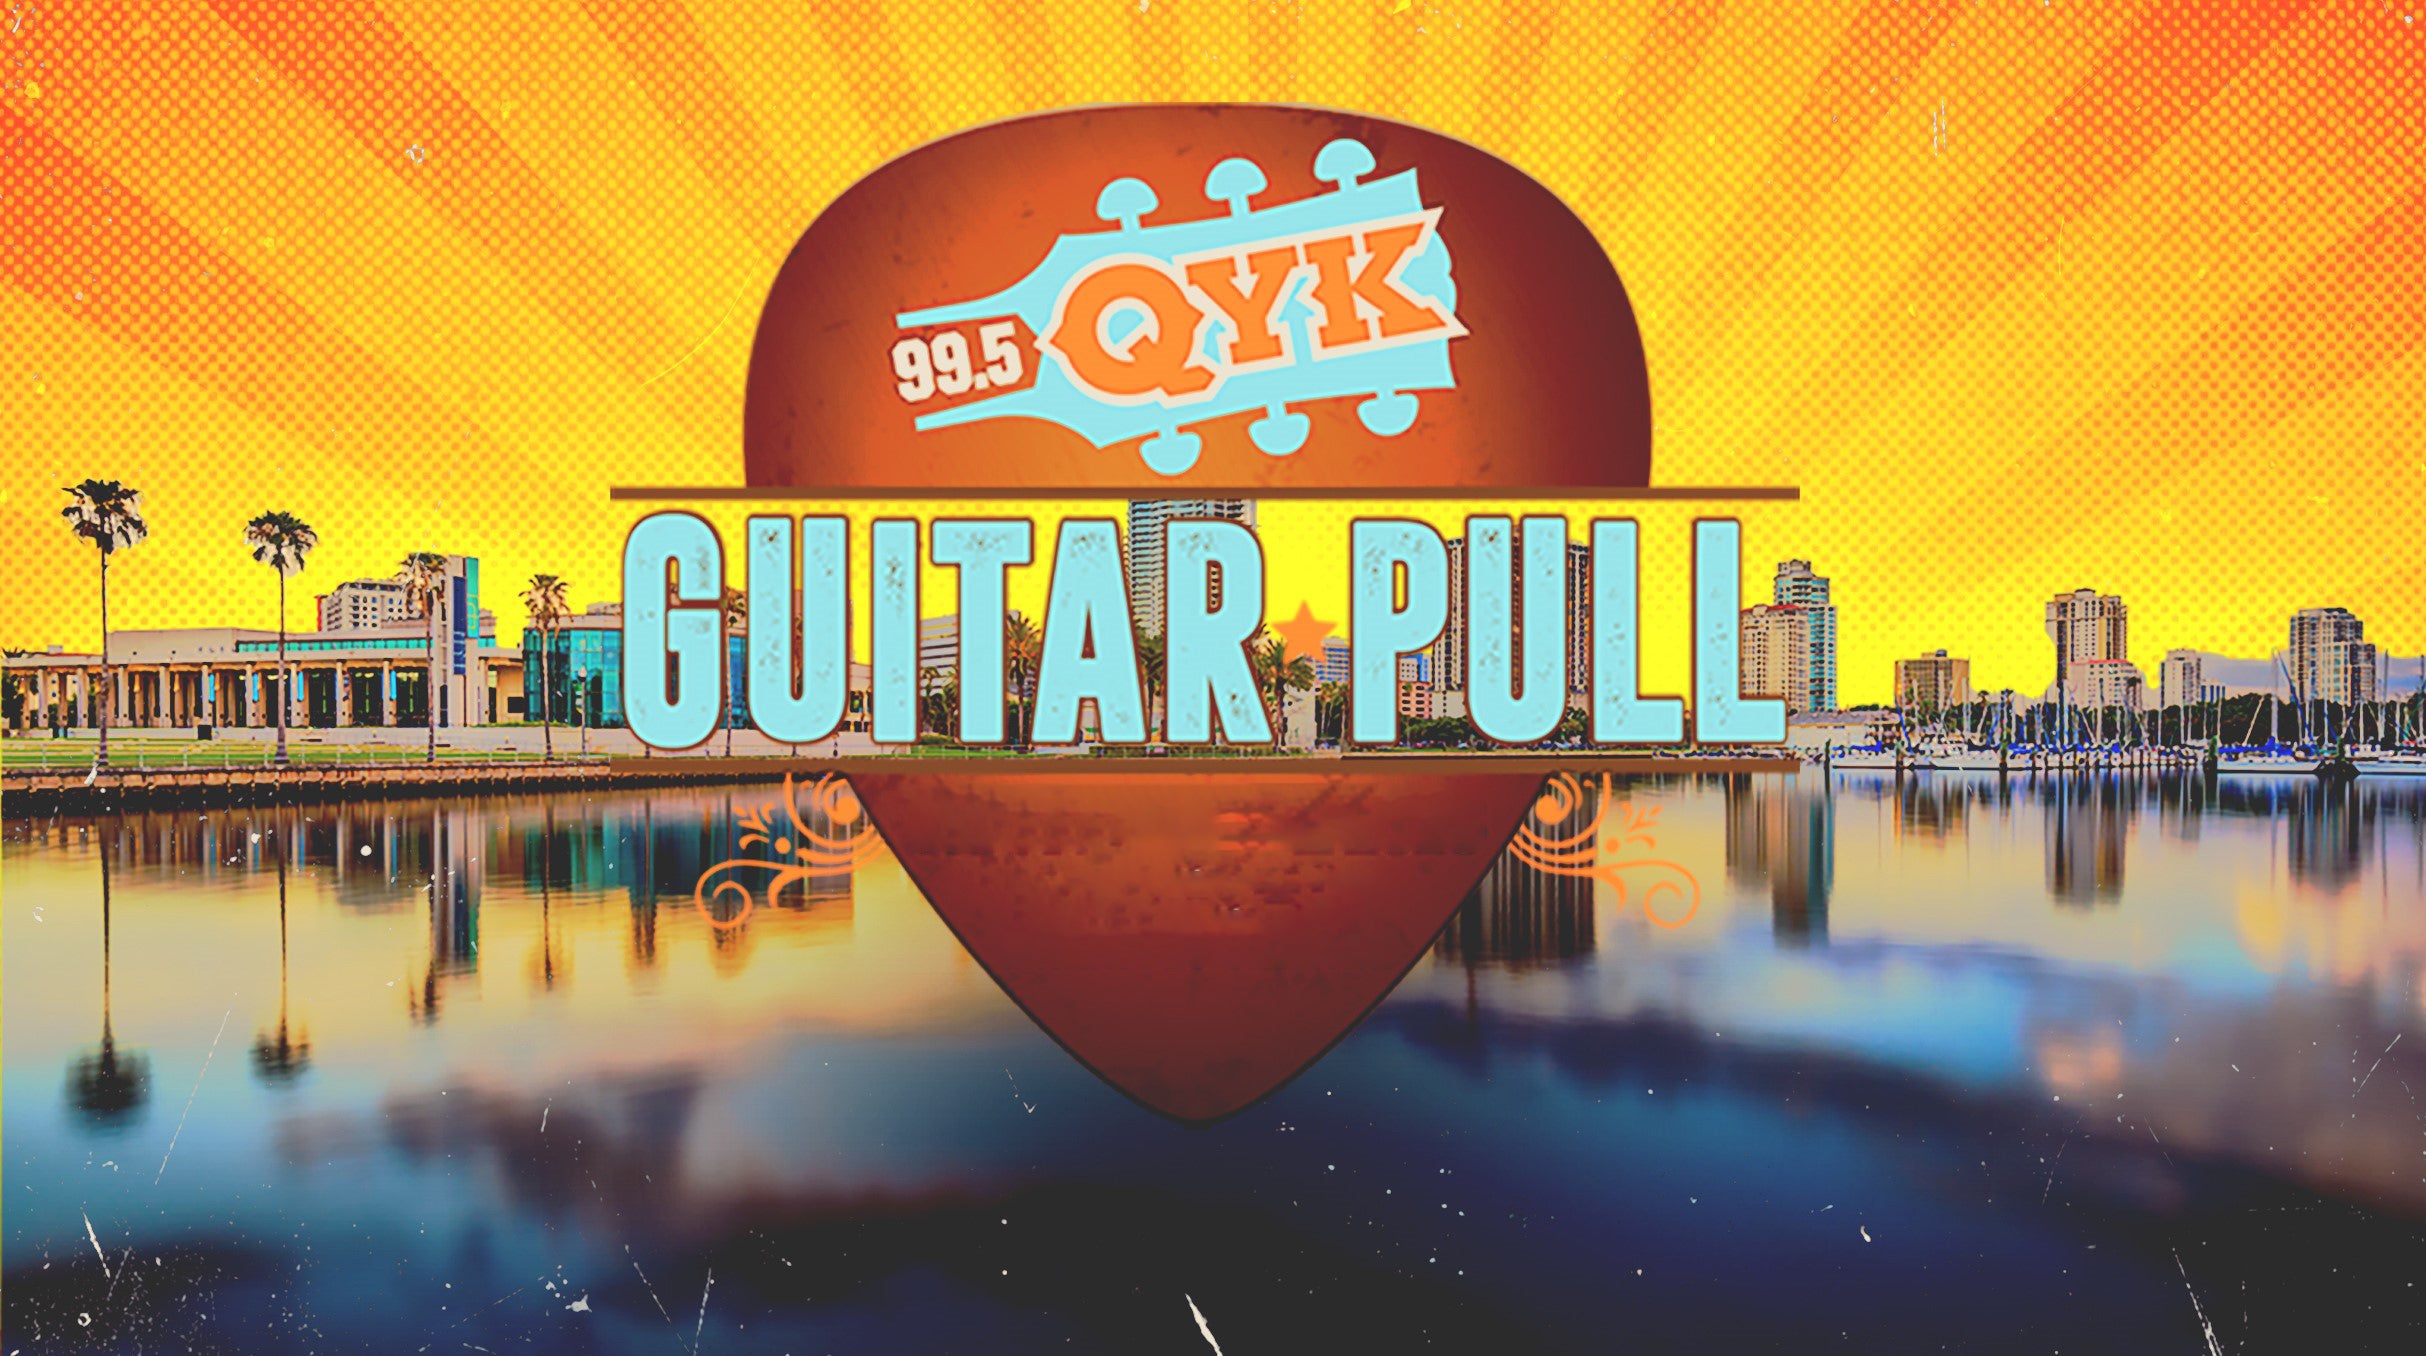 99.5 QYK Guitar Pull in St Petersburg promo photo for Official Platinum presale offer code